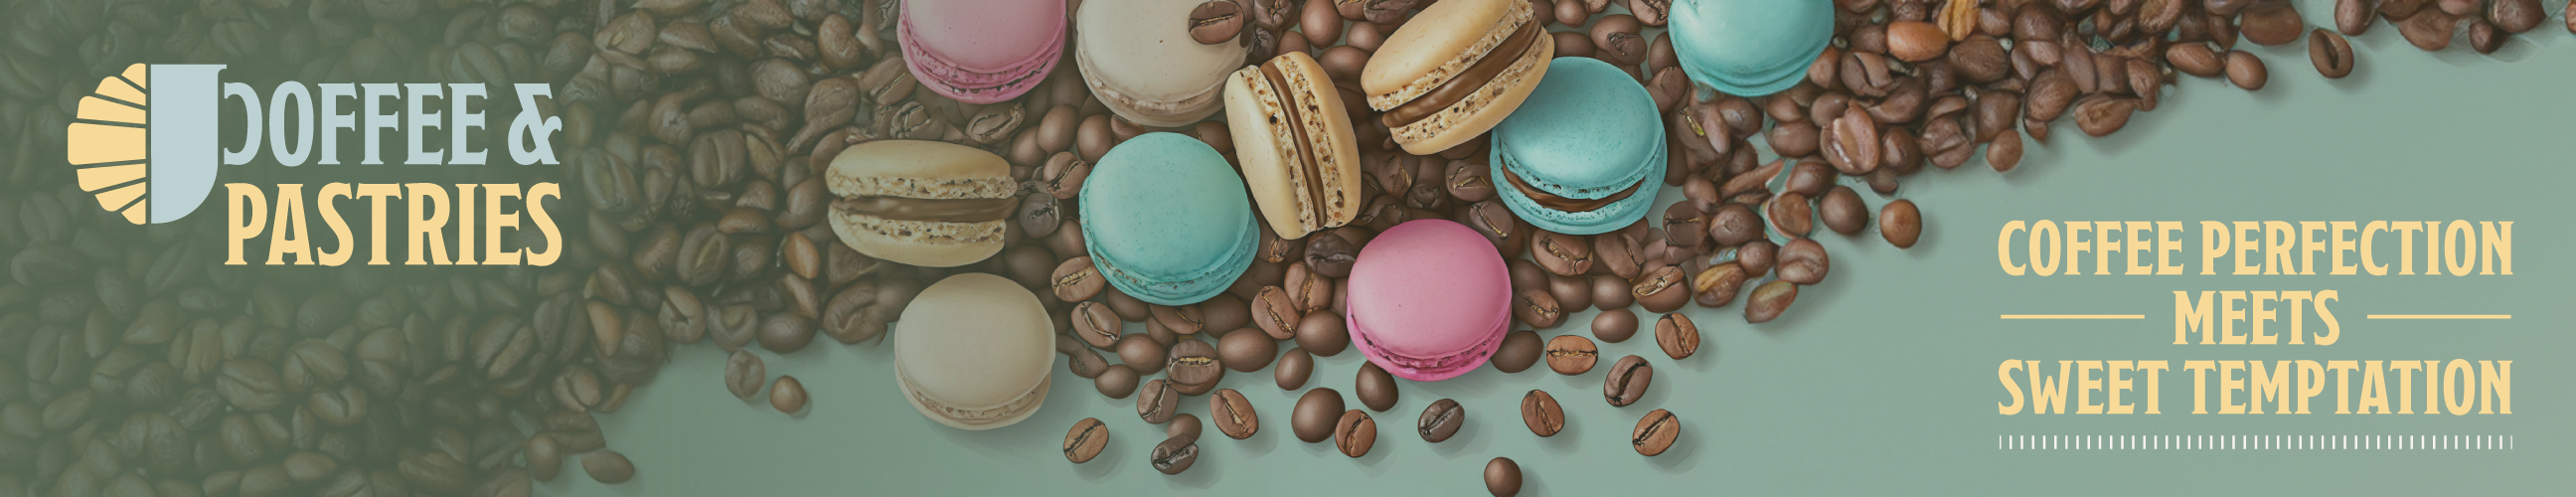 Coffee and Pastries world Banner